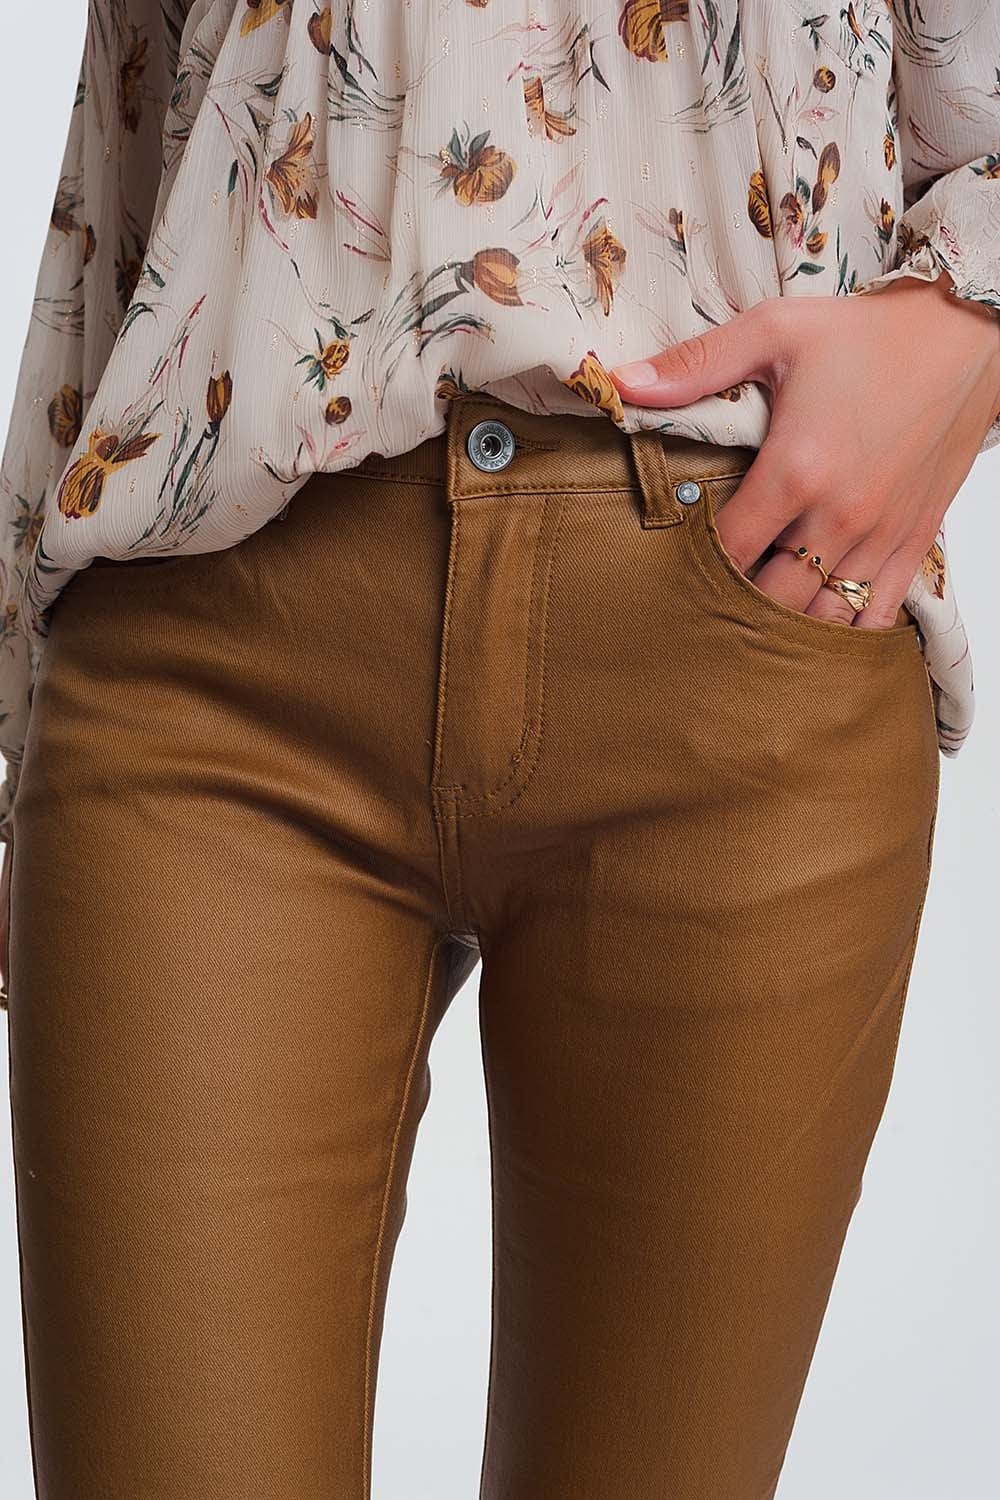 camel pants outfit